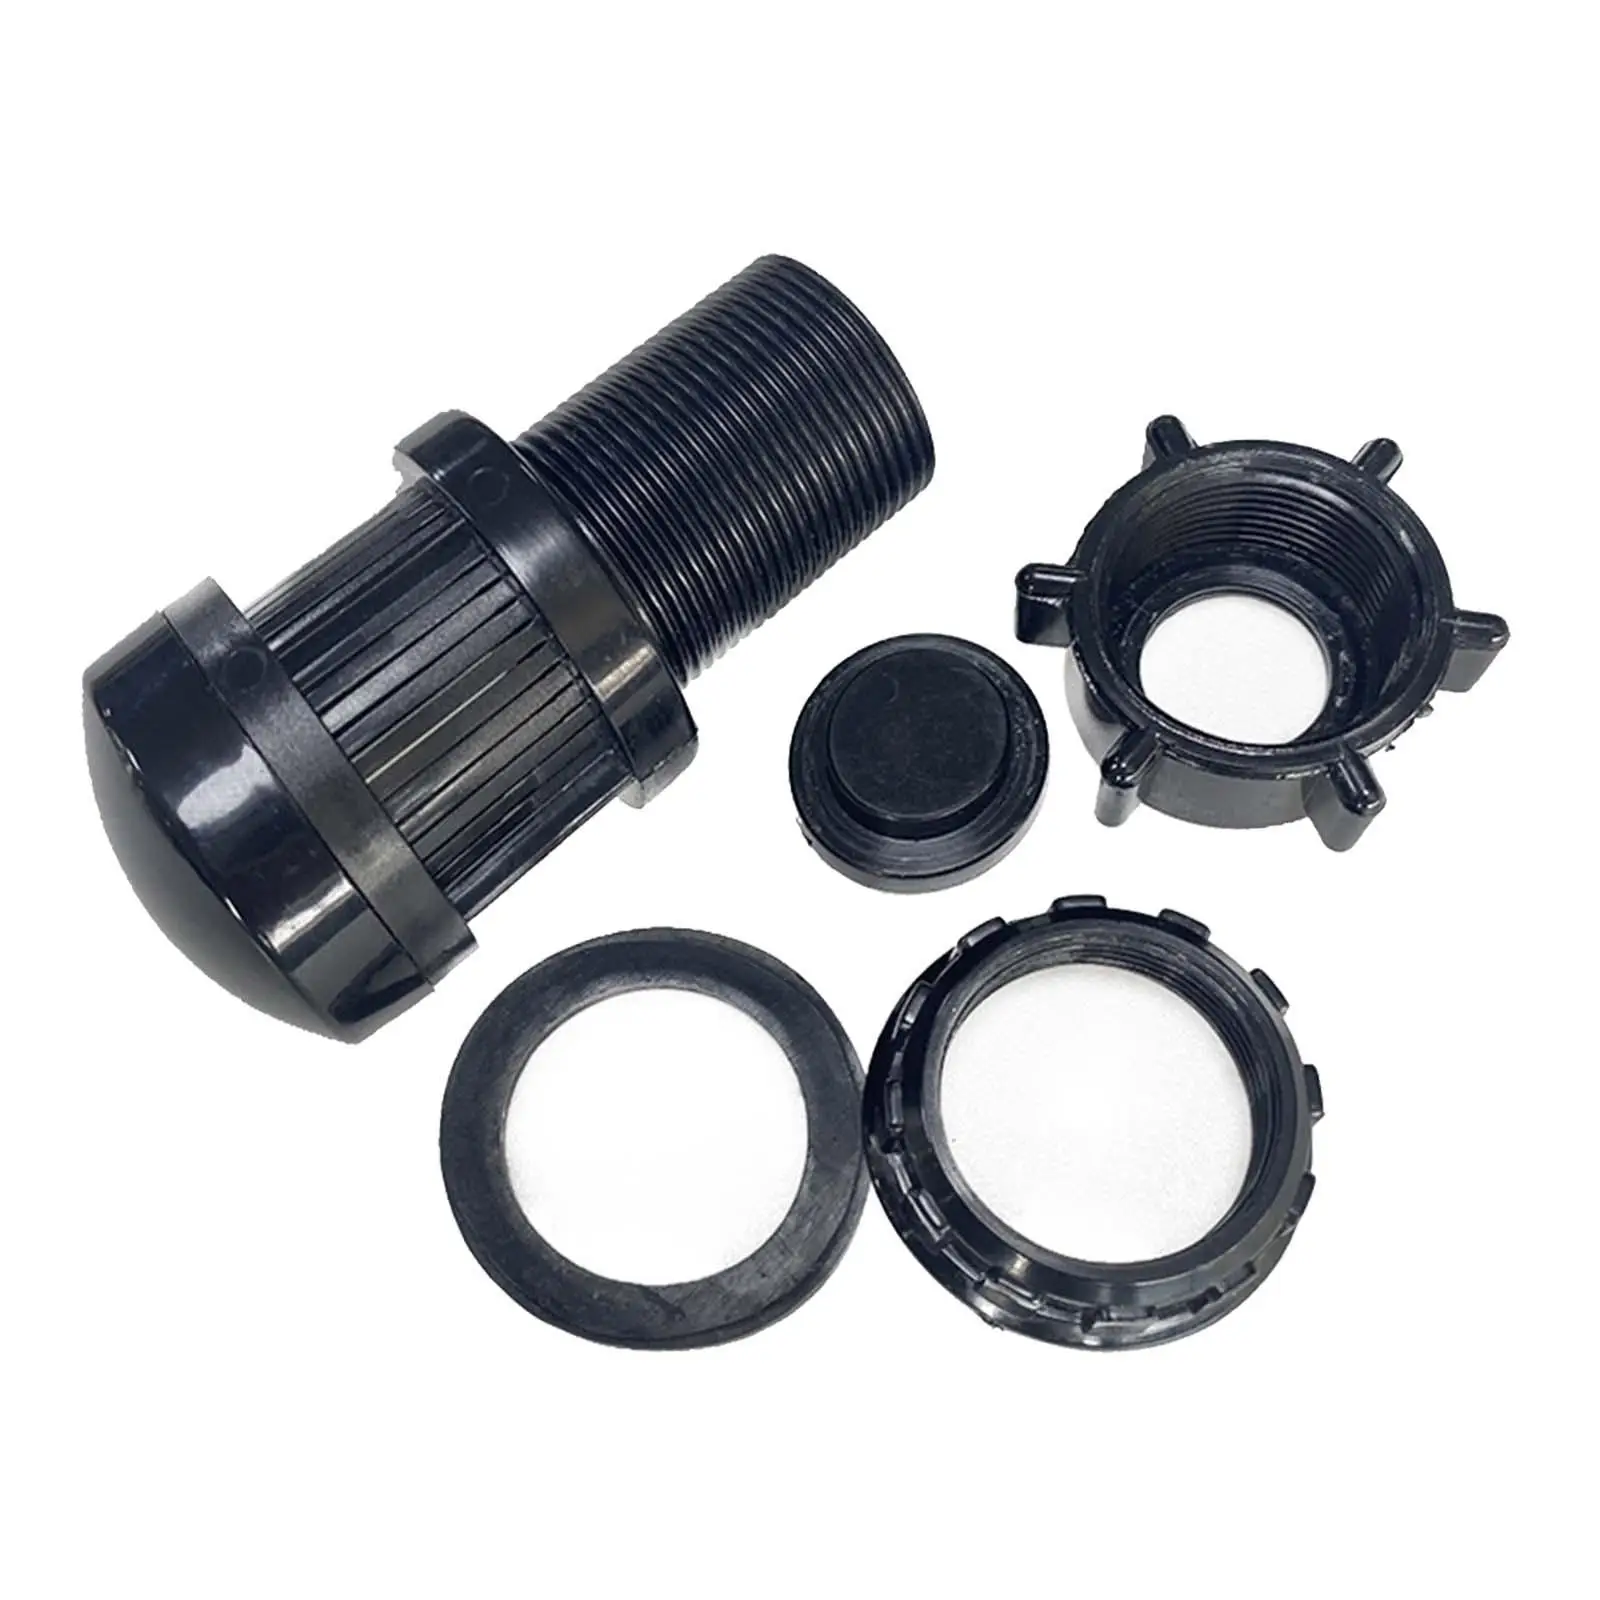 Sand Filter Drain Plug Assembly Fitting Water Drain Set Drain Valve for Swimming Pool Sand Tank Sand Filter Pumps Accessories